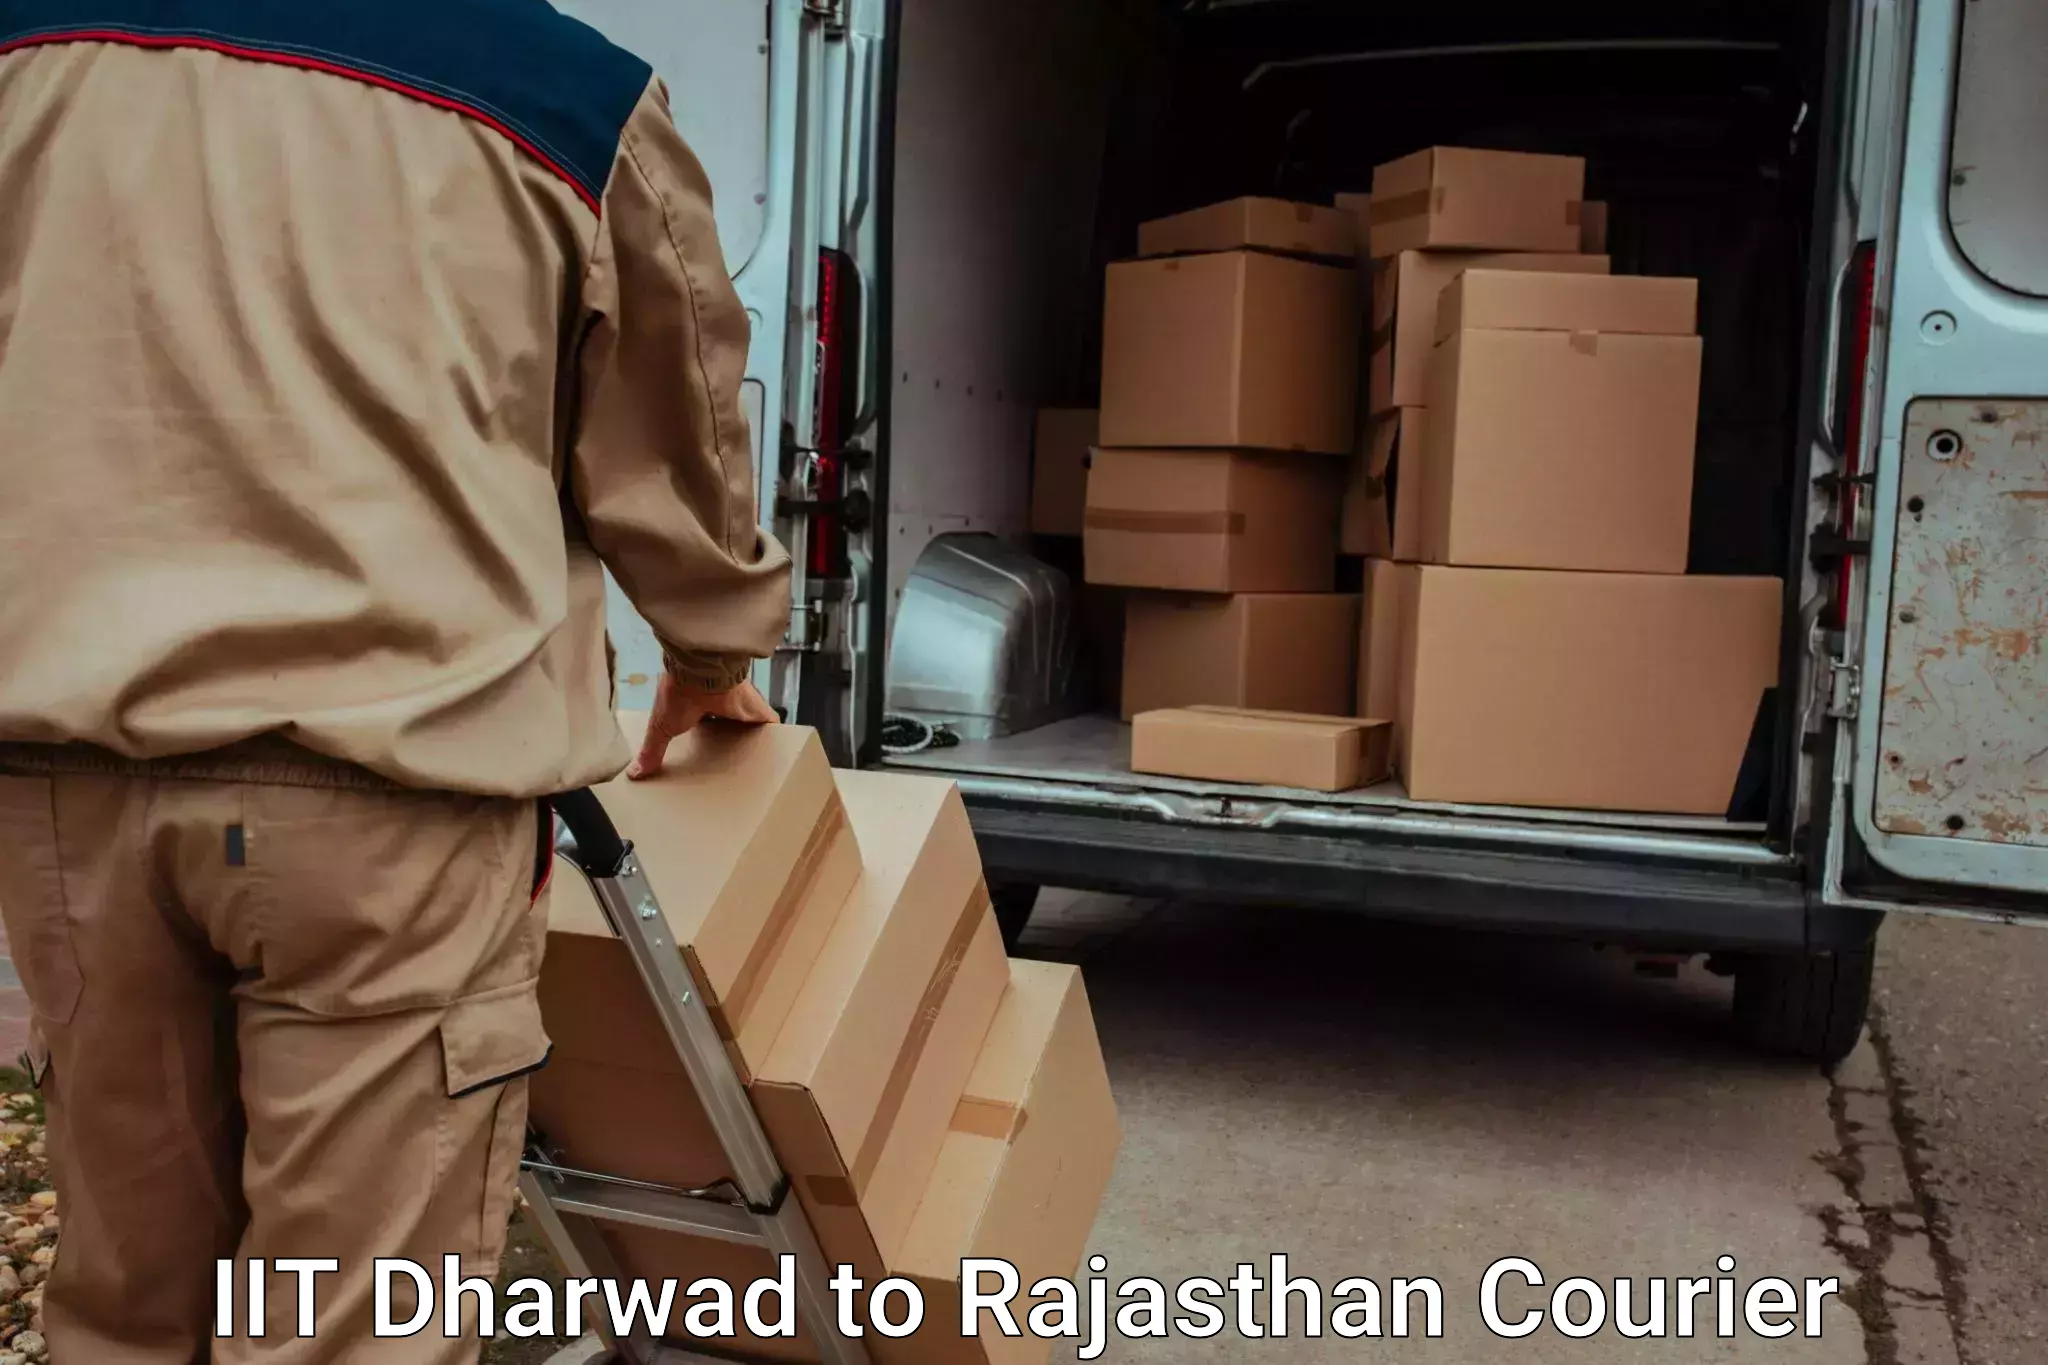 Baggage relocation service IIT Dharwad to Phalodi